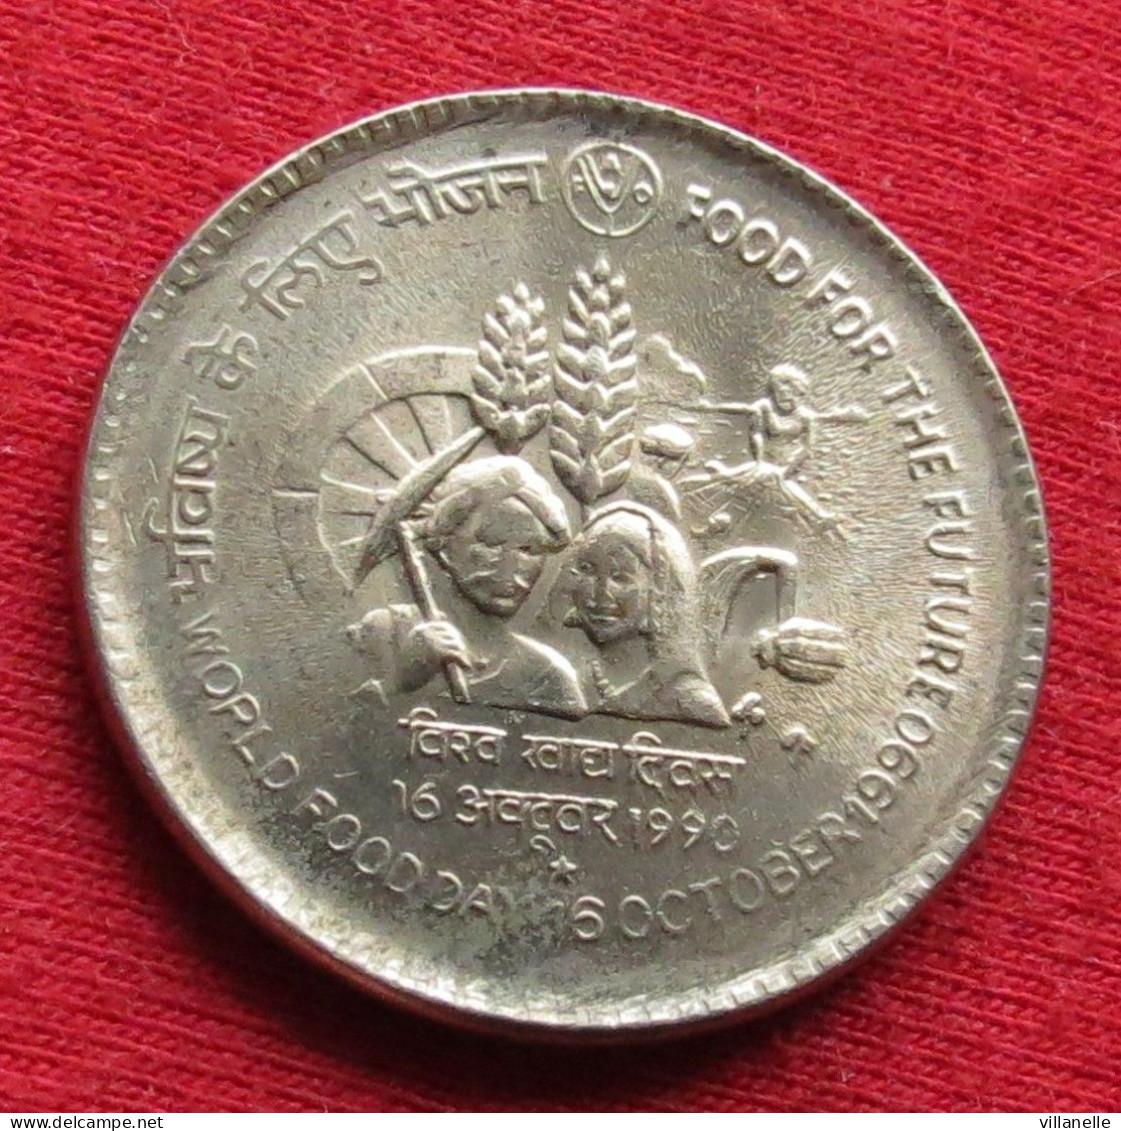 India 1 Rupee 1990 H KM# 88.1 FAO F.a.o. Lt 704 Reeded Edge *VT Hyderabad Mint Inde Indien Indies Indie - Inde